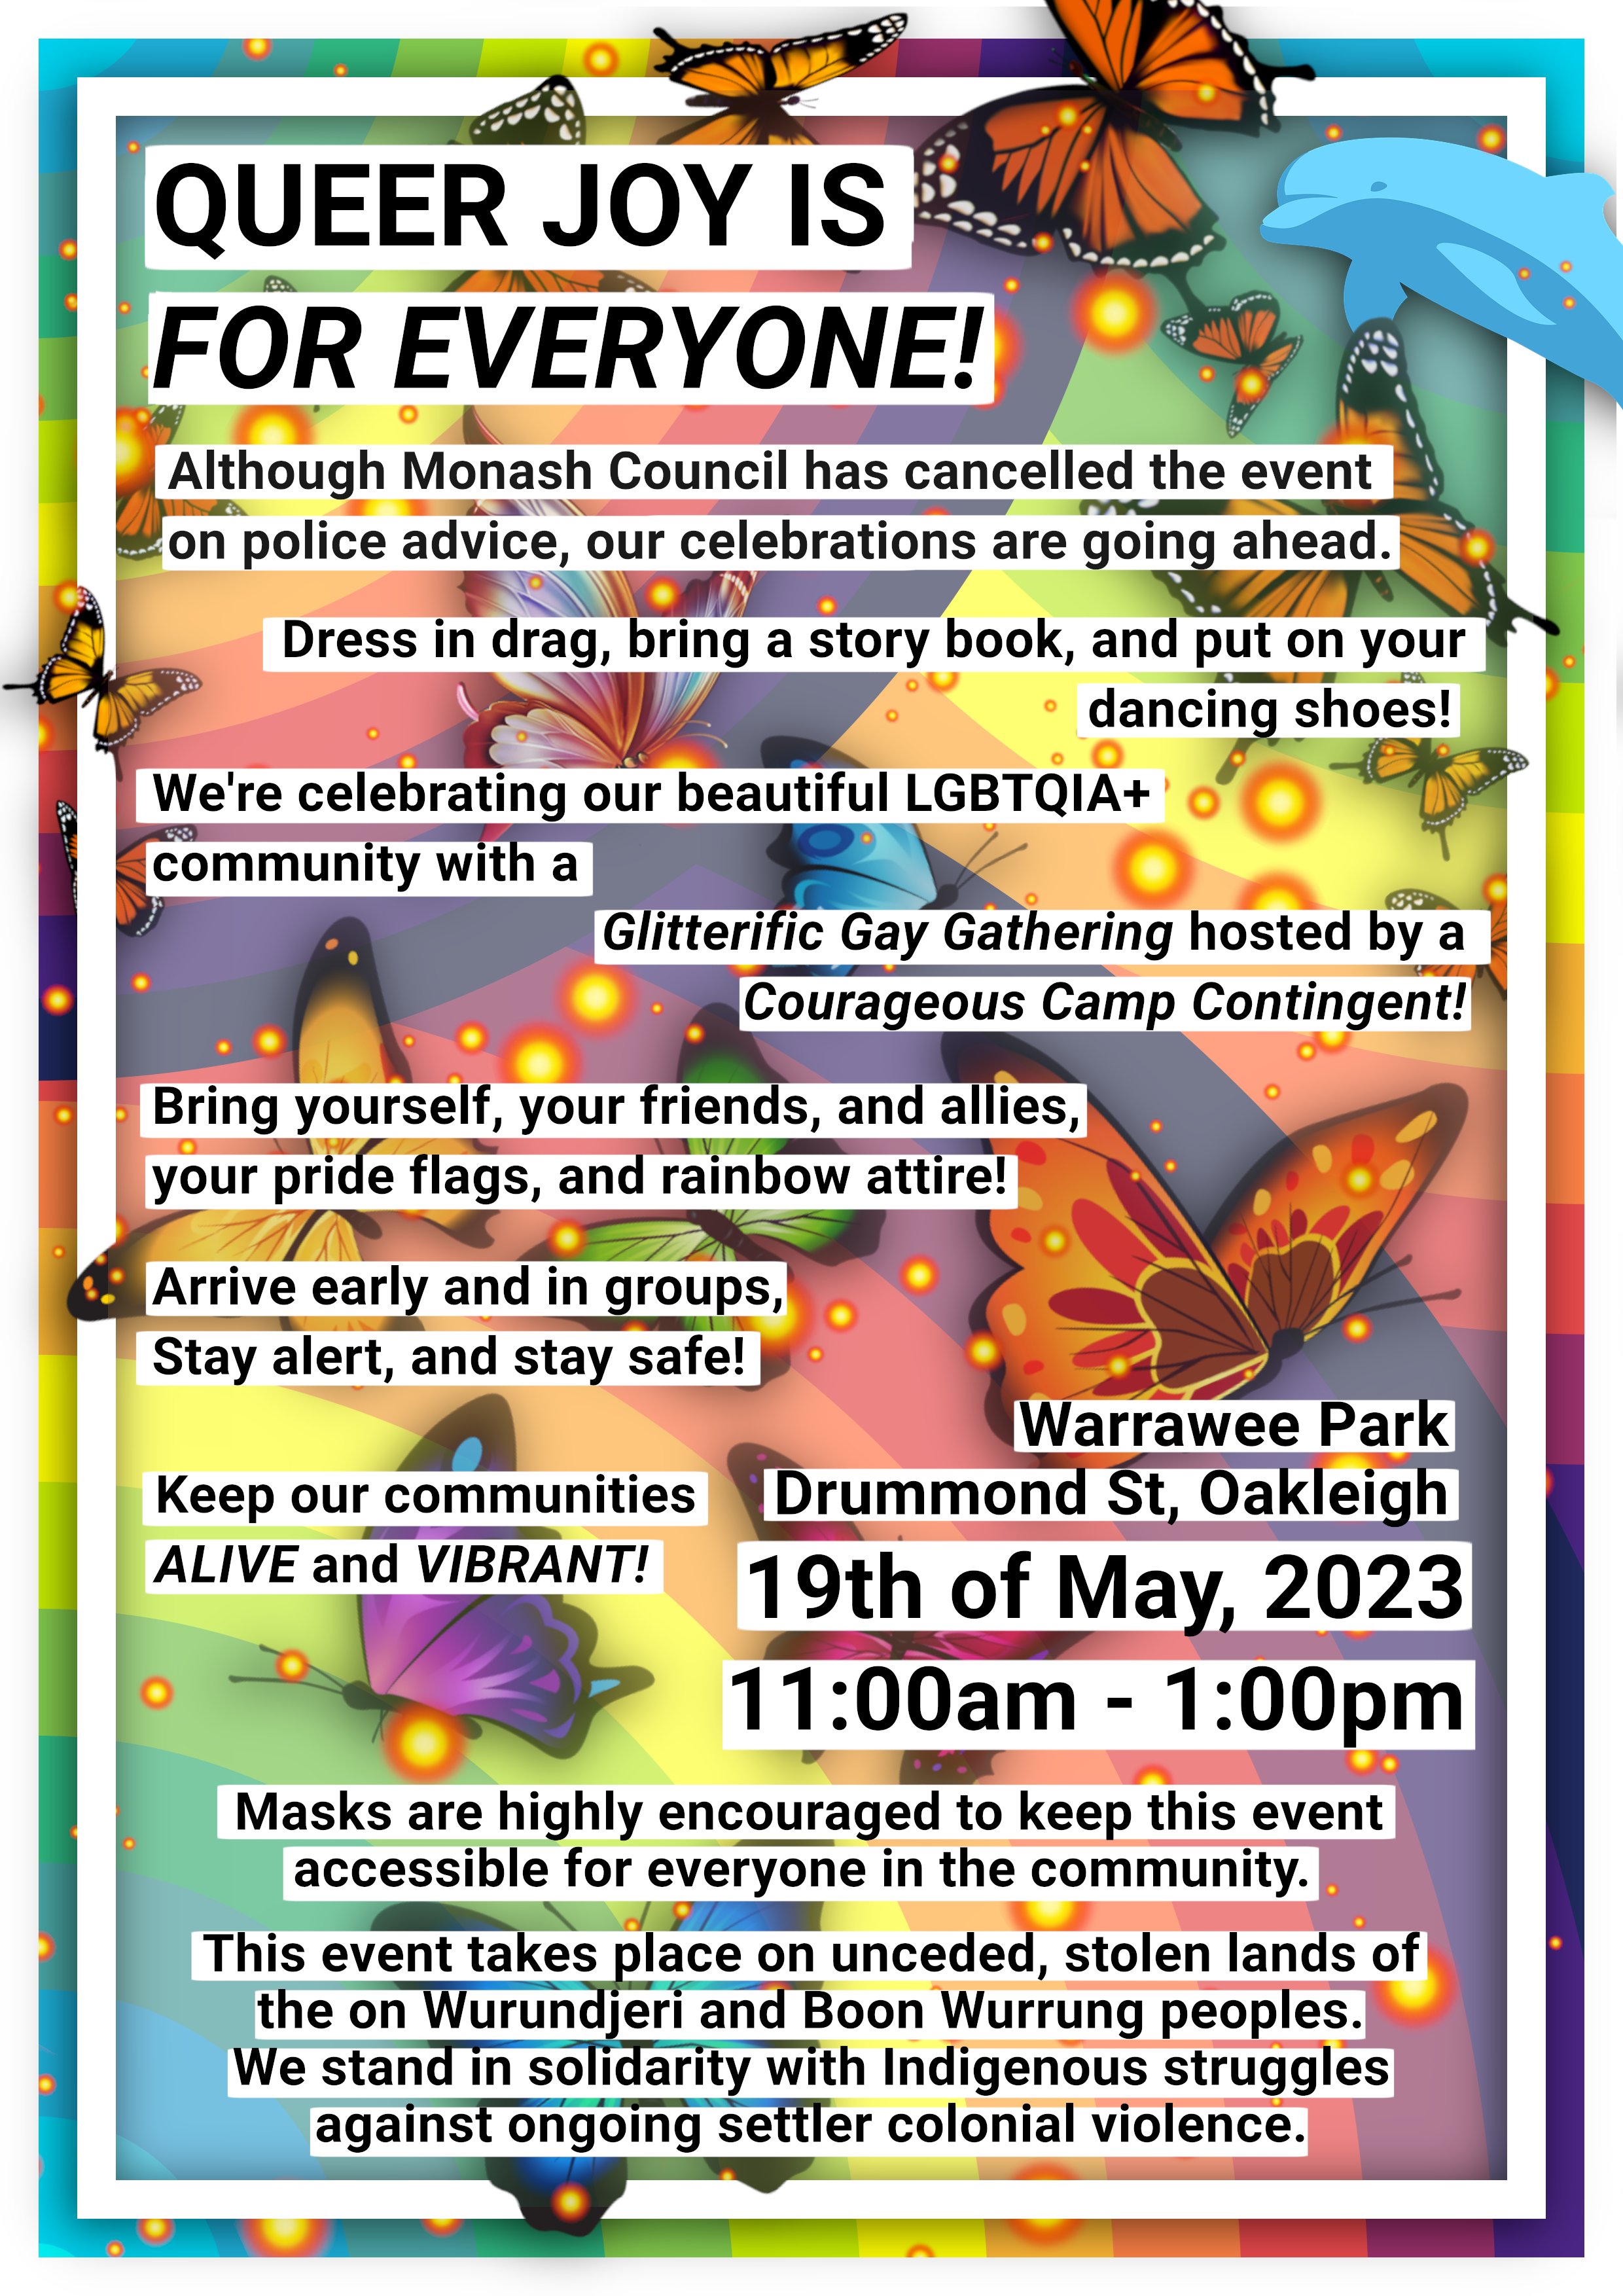 A cartoon background of rainbows, butterflies, a dolphin and white border overlaid with the following text: QUEER JOY IS FOR EVERYONE! Warrawee Park Drummond St, Oakleigh 19th of May, 2023 11:00am - 1:00pm. 